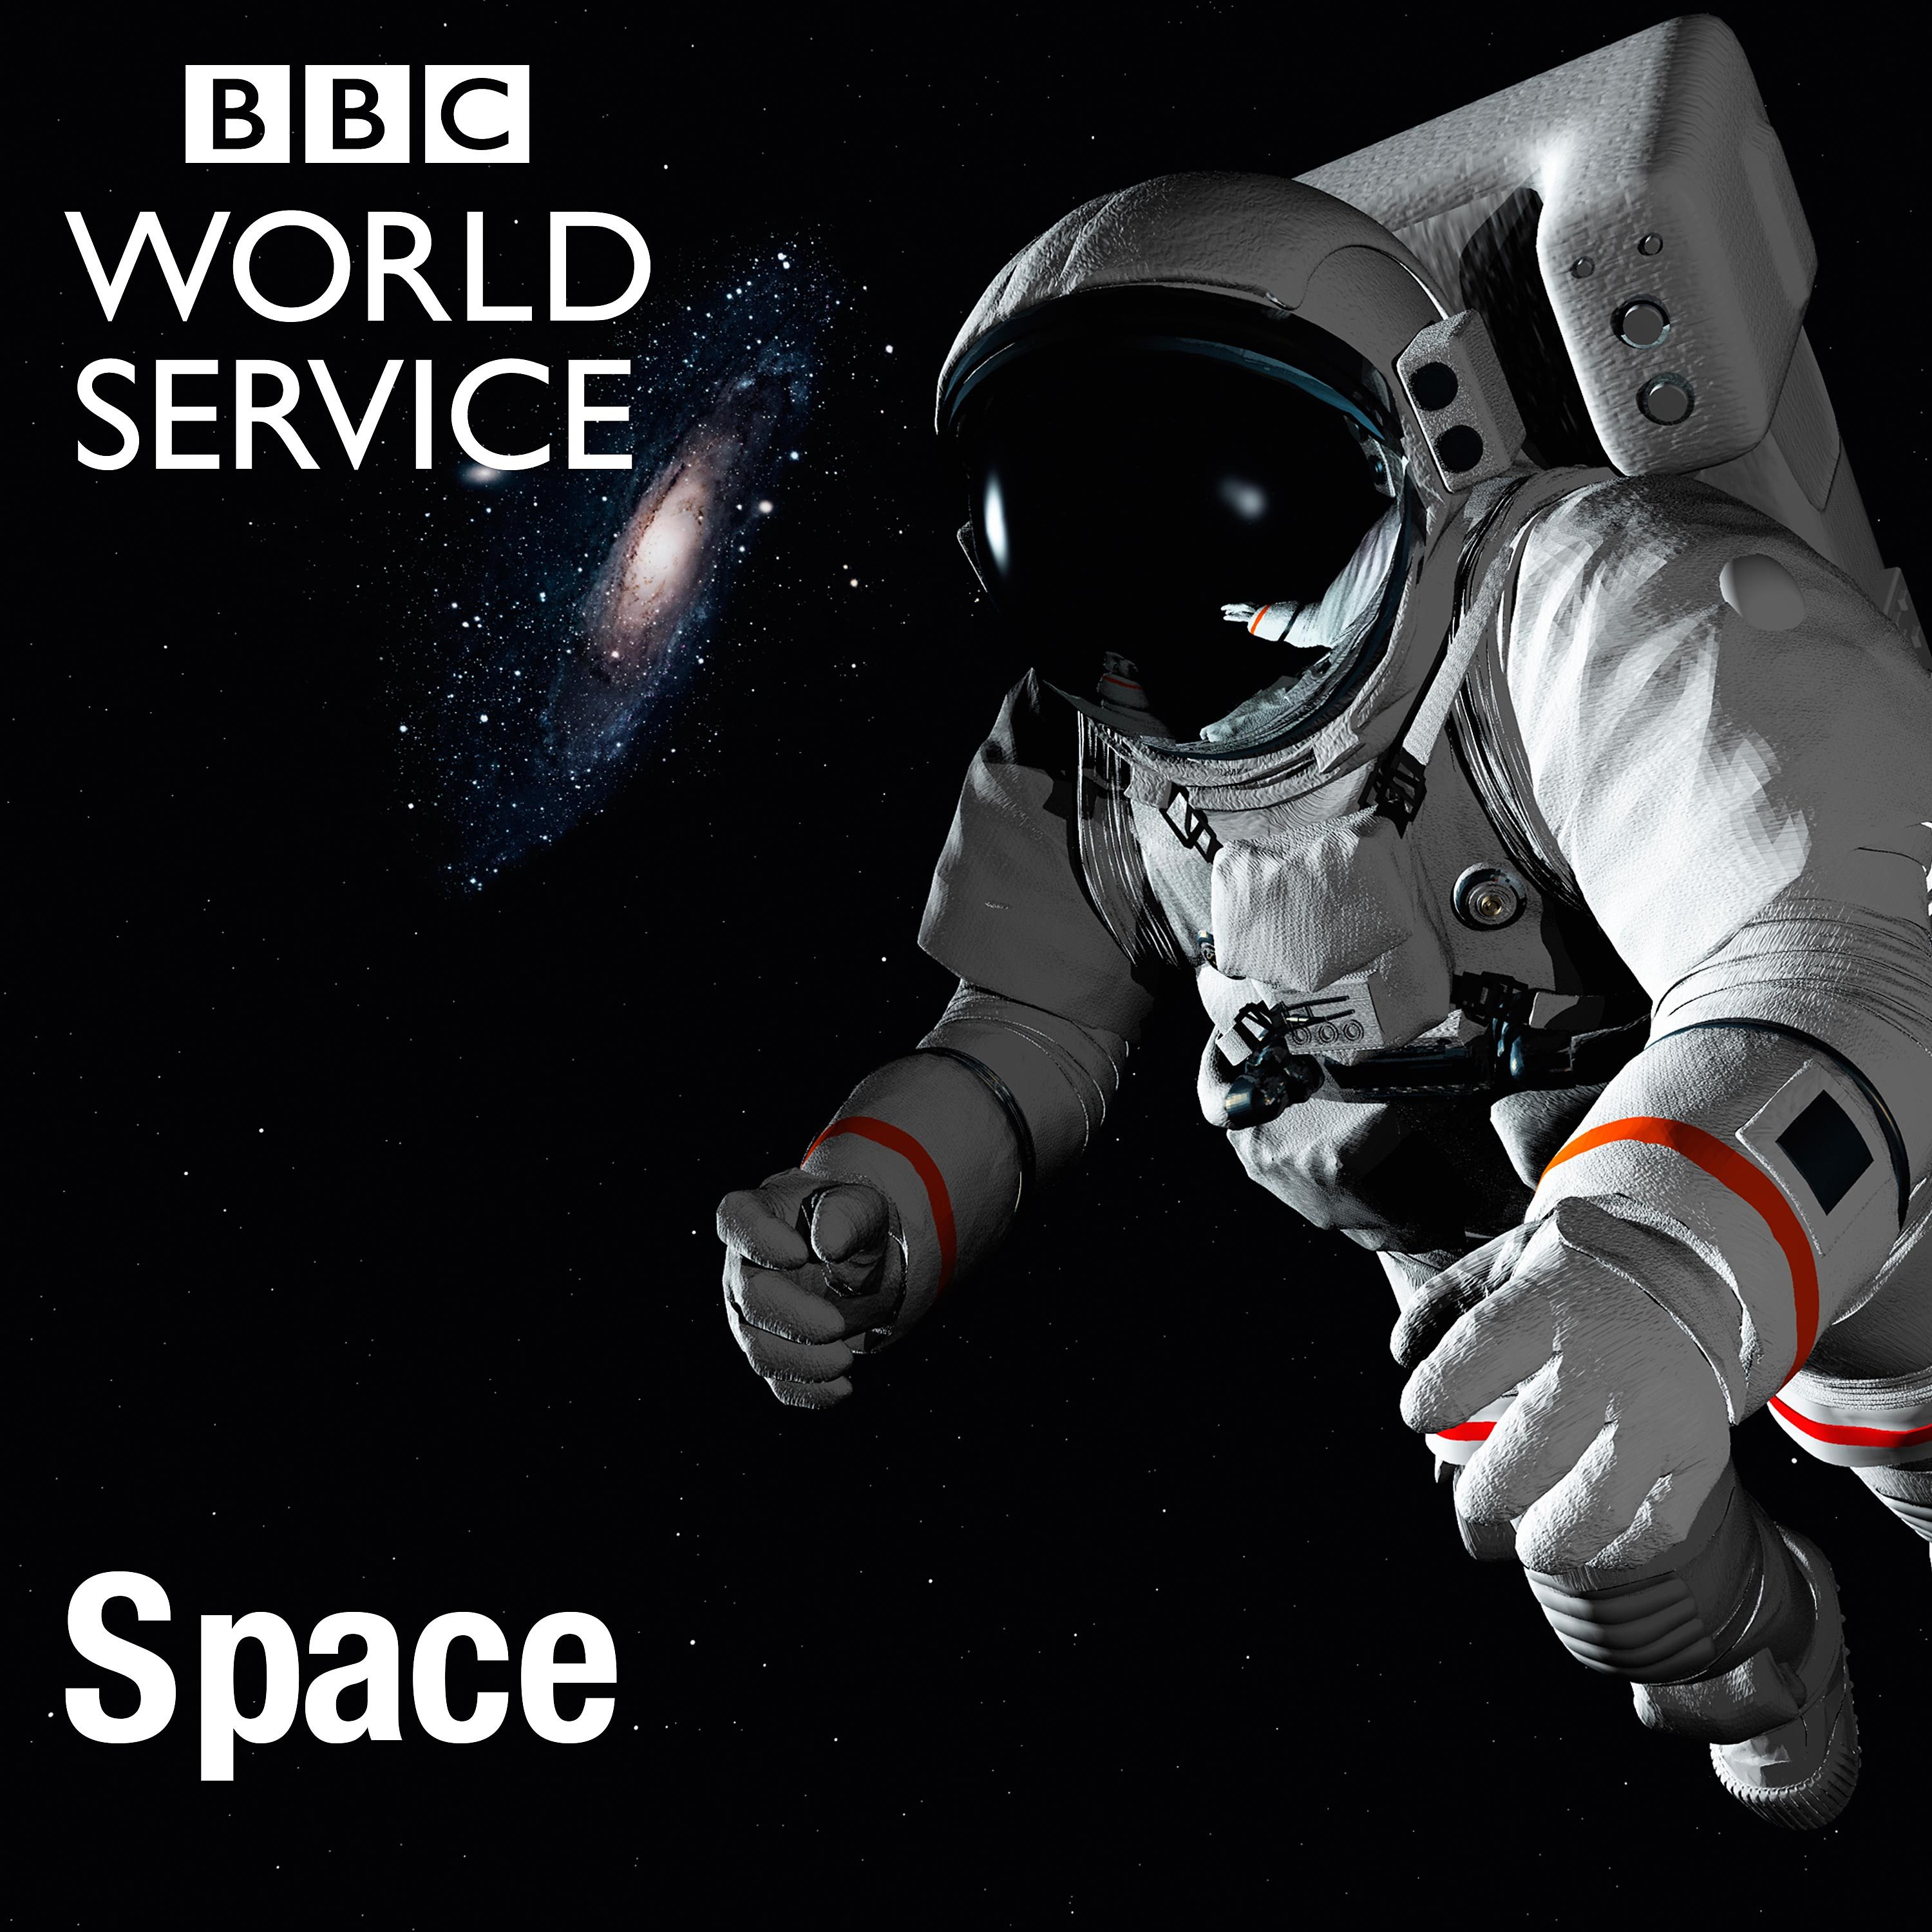 ‘I Nearly Drowned in Space’